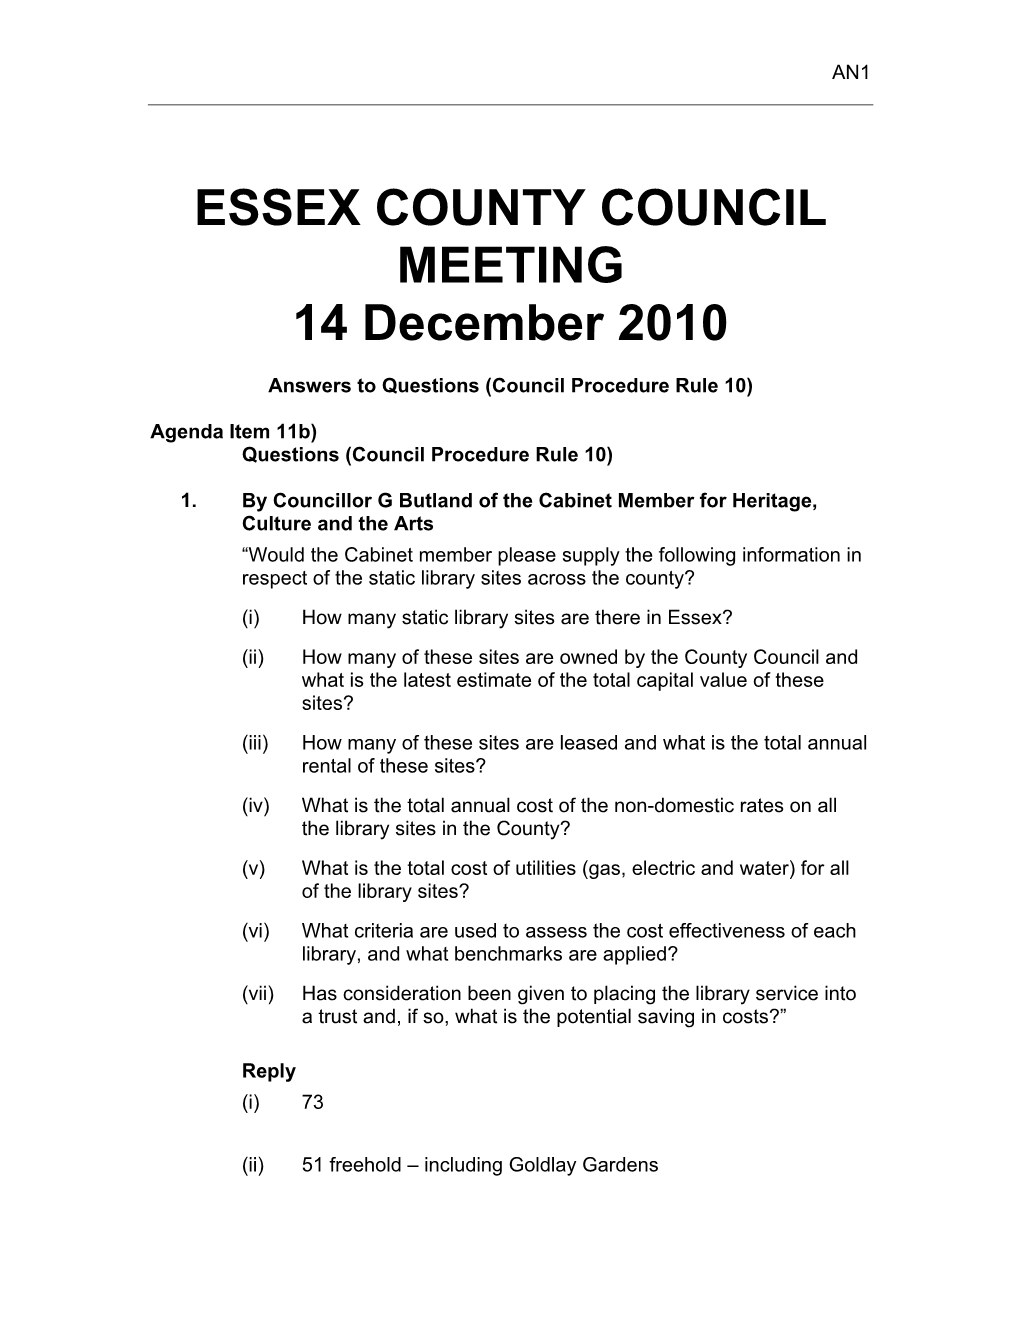 ESSEX COUNTY COUNCIL MEETING 14 December 2010